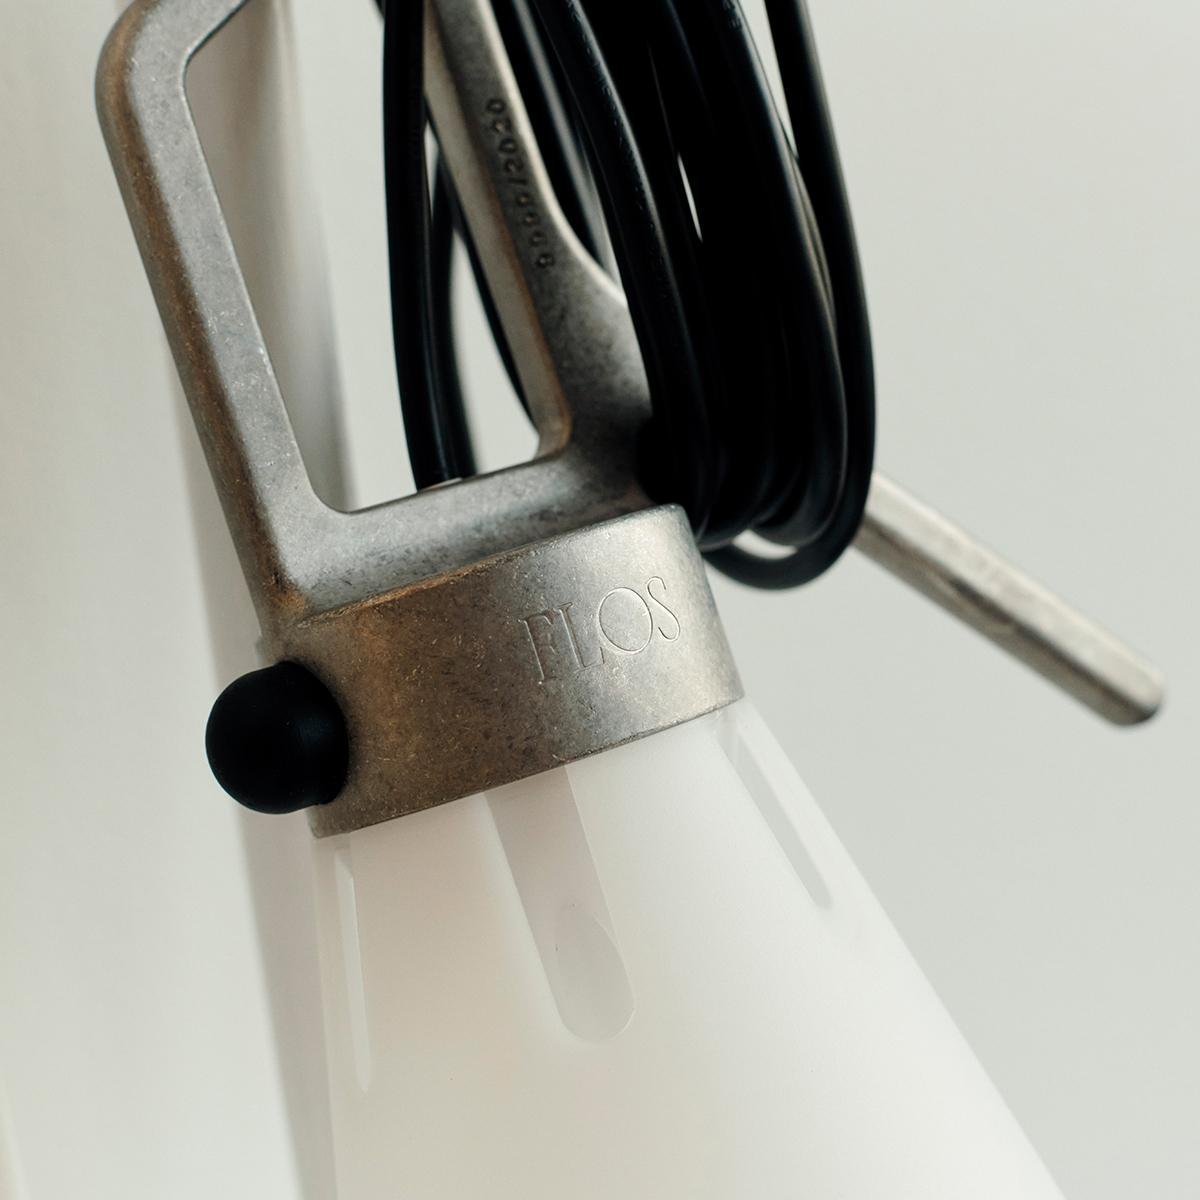 Anodized Flos Mayday Anniversary Multi Use Lamp in Light Grey by Konstantin Grcic